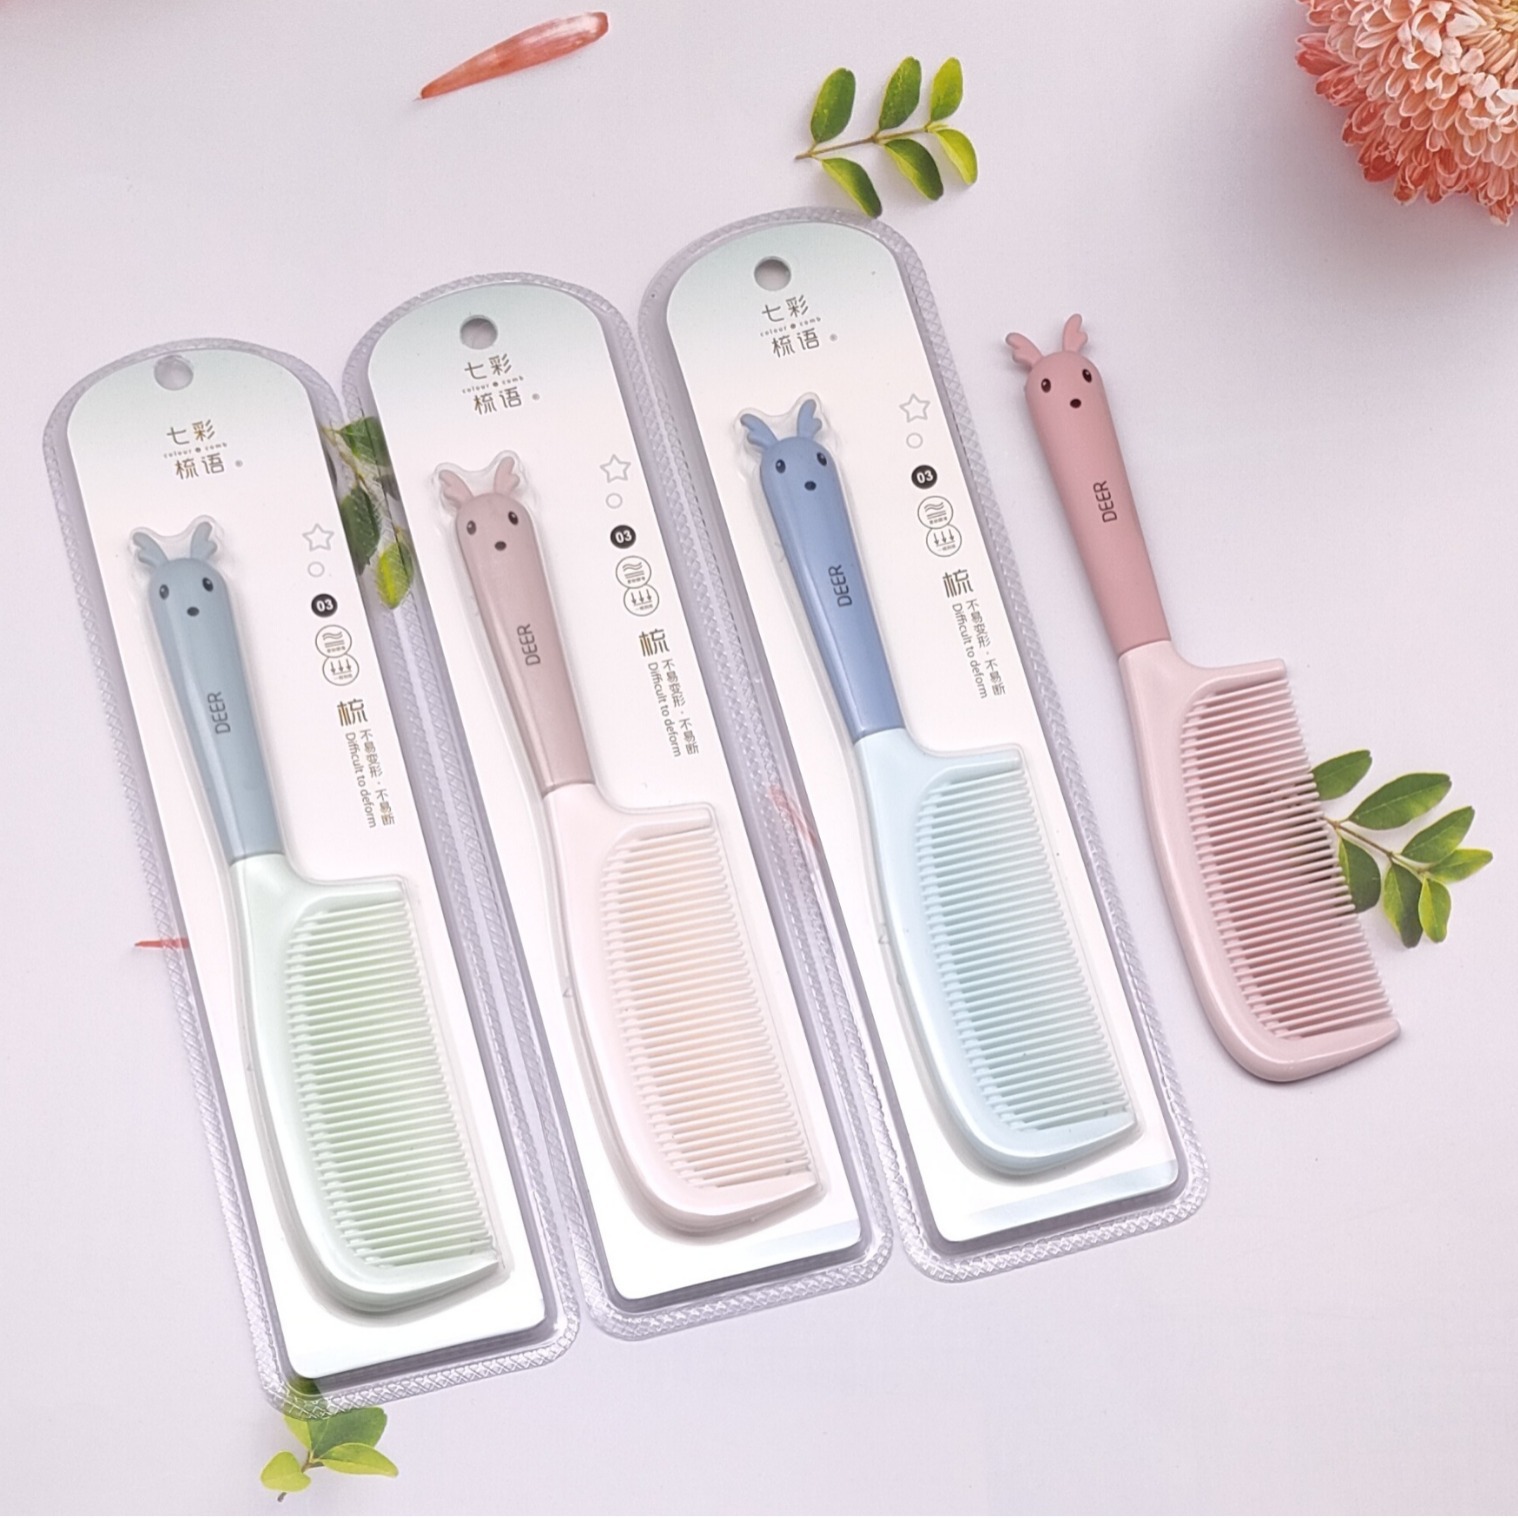 New Trendy Home Daily Plastic Comb Large Dense Gear Hairdressing Style Cartoon Comb Blister Packaging for Supermarket